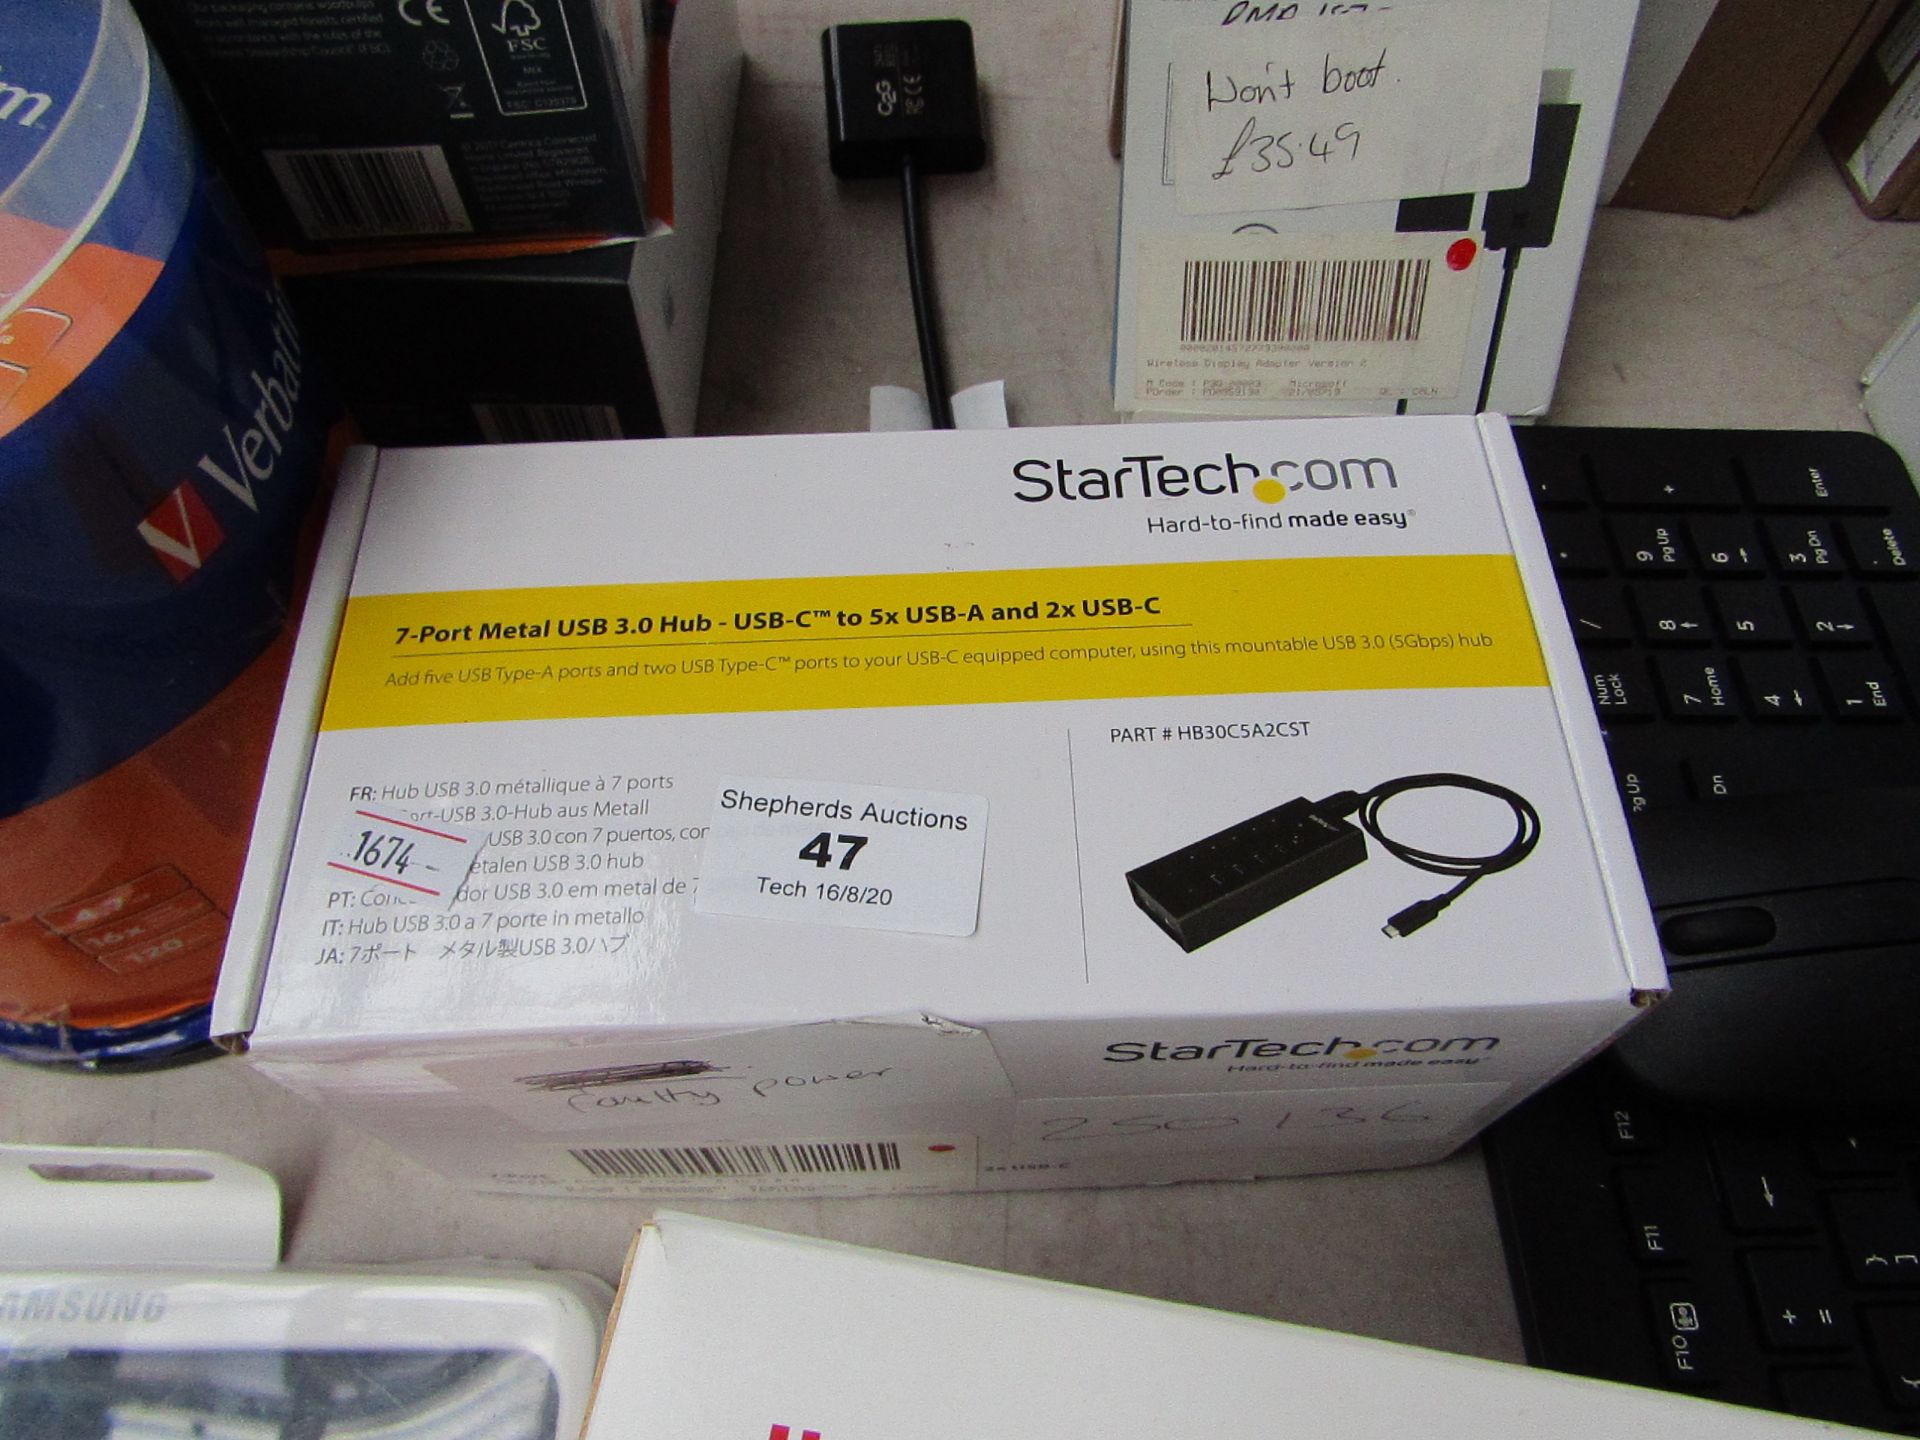 Startech 7 port metal USB 3.0 Hub, unchecked and boxed.